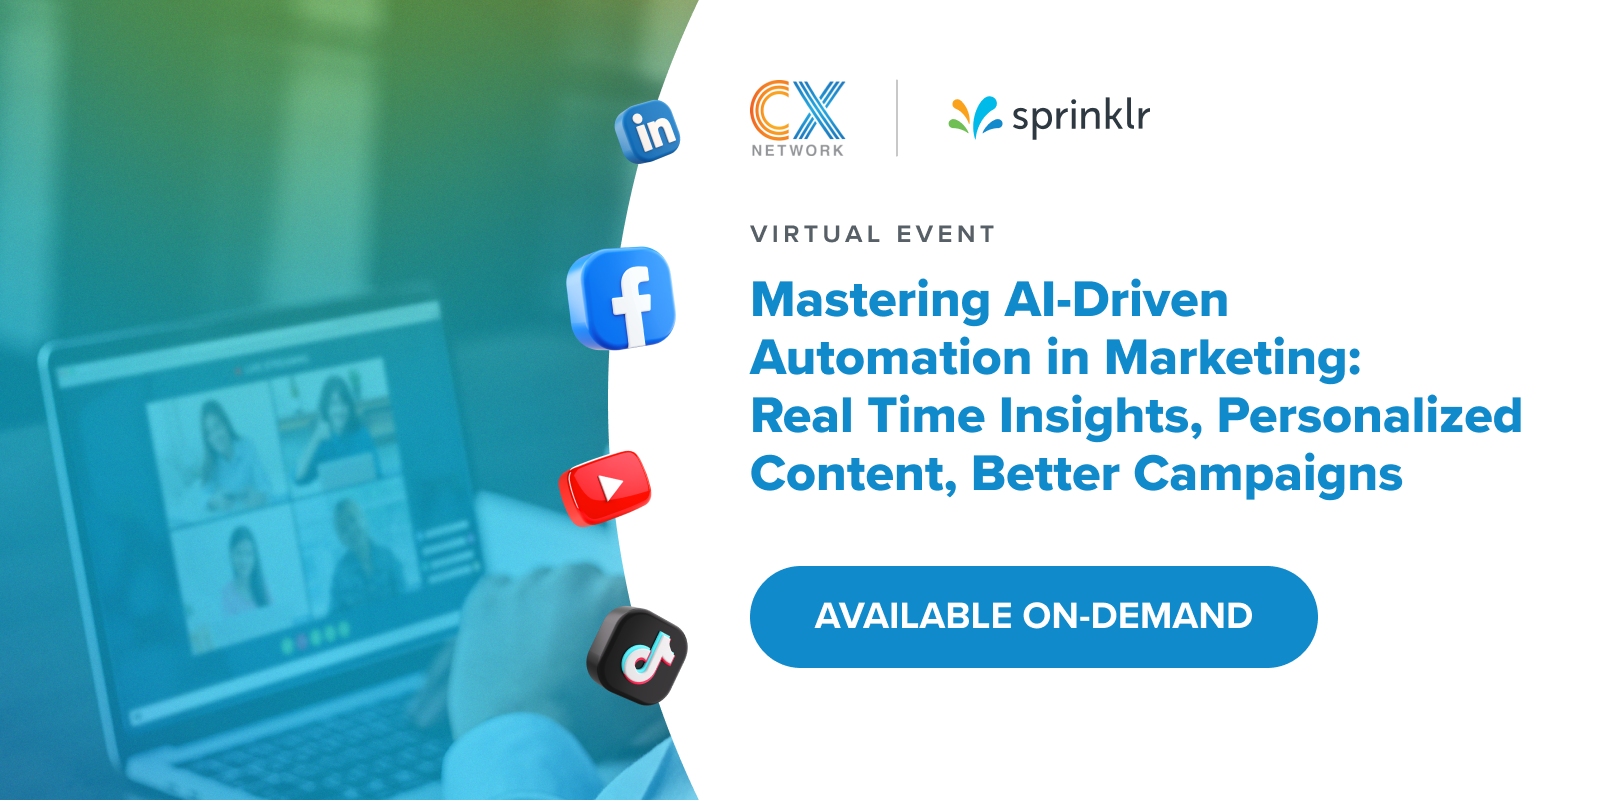 Mastering AI-Driven Automation in Marketing: Real Time Insights, Personalized Content, Better Campaigns